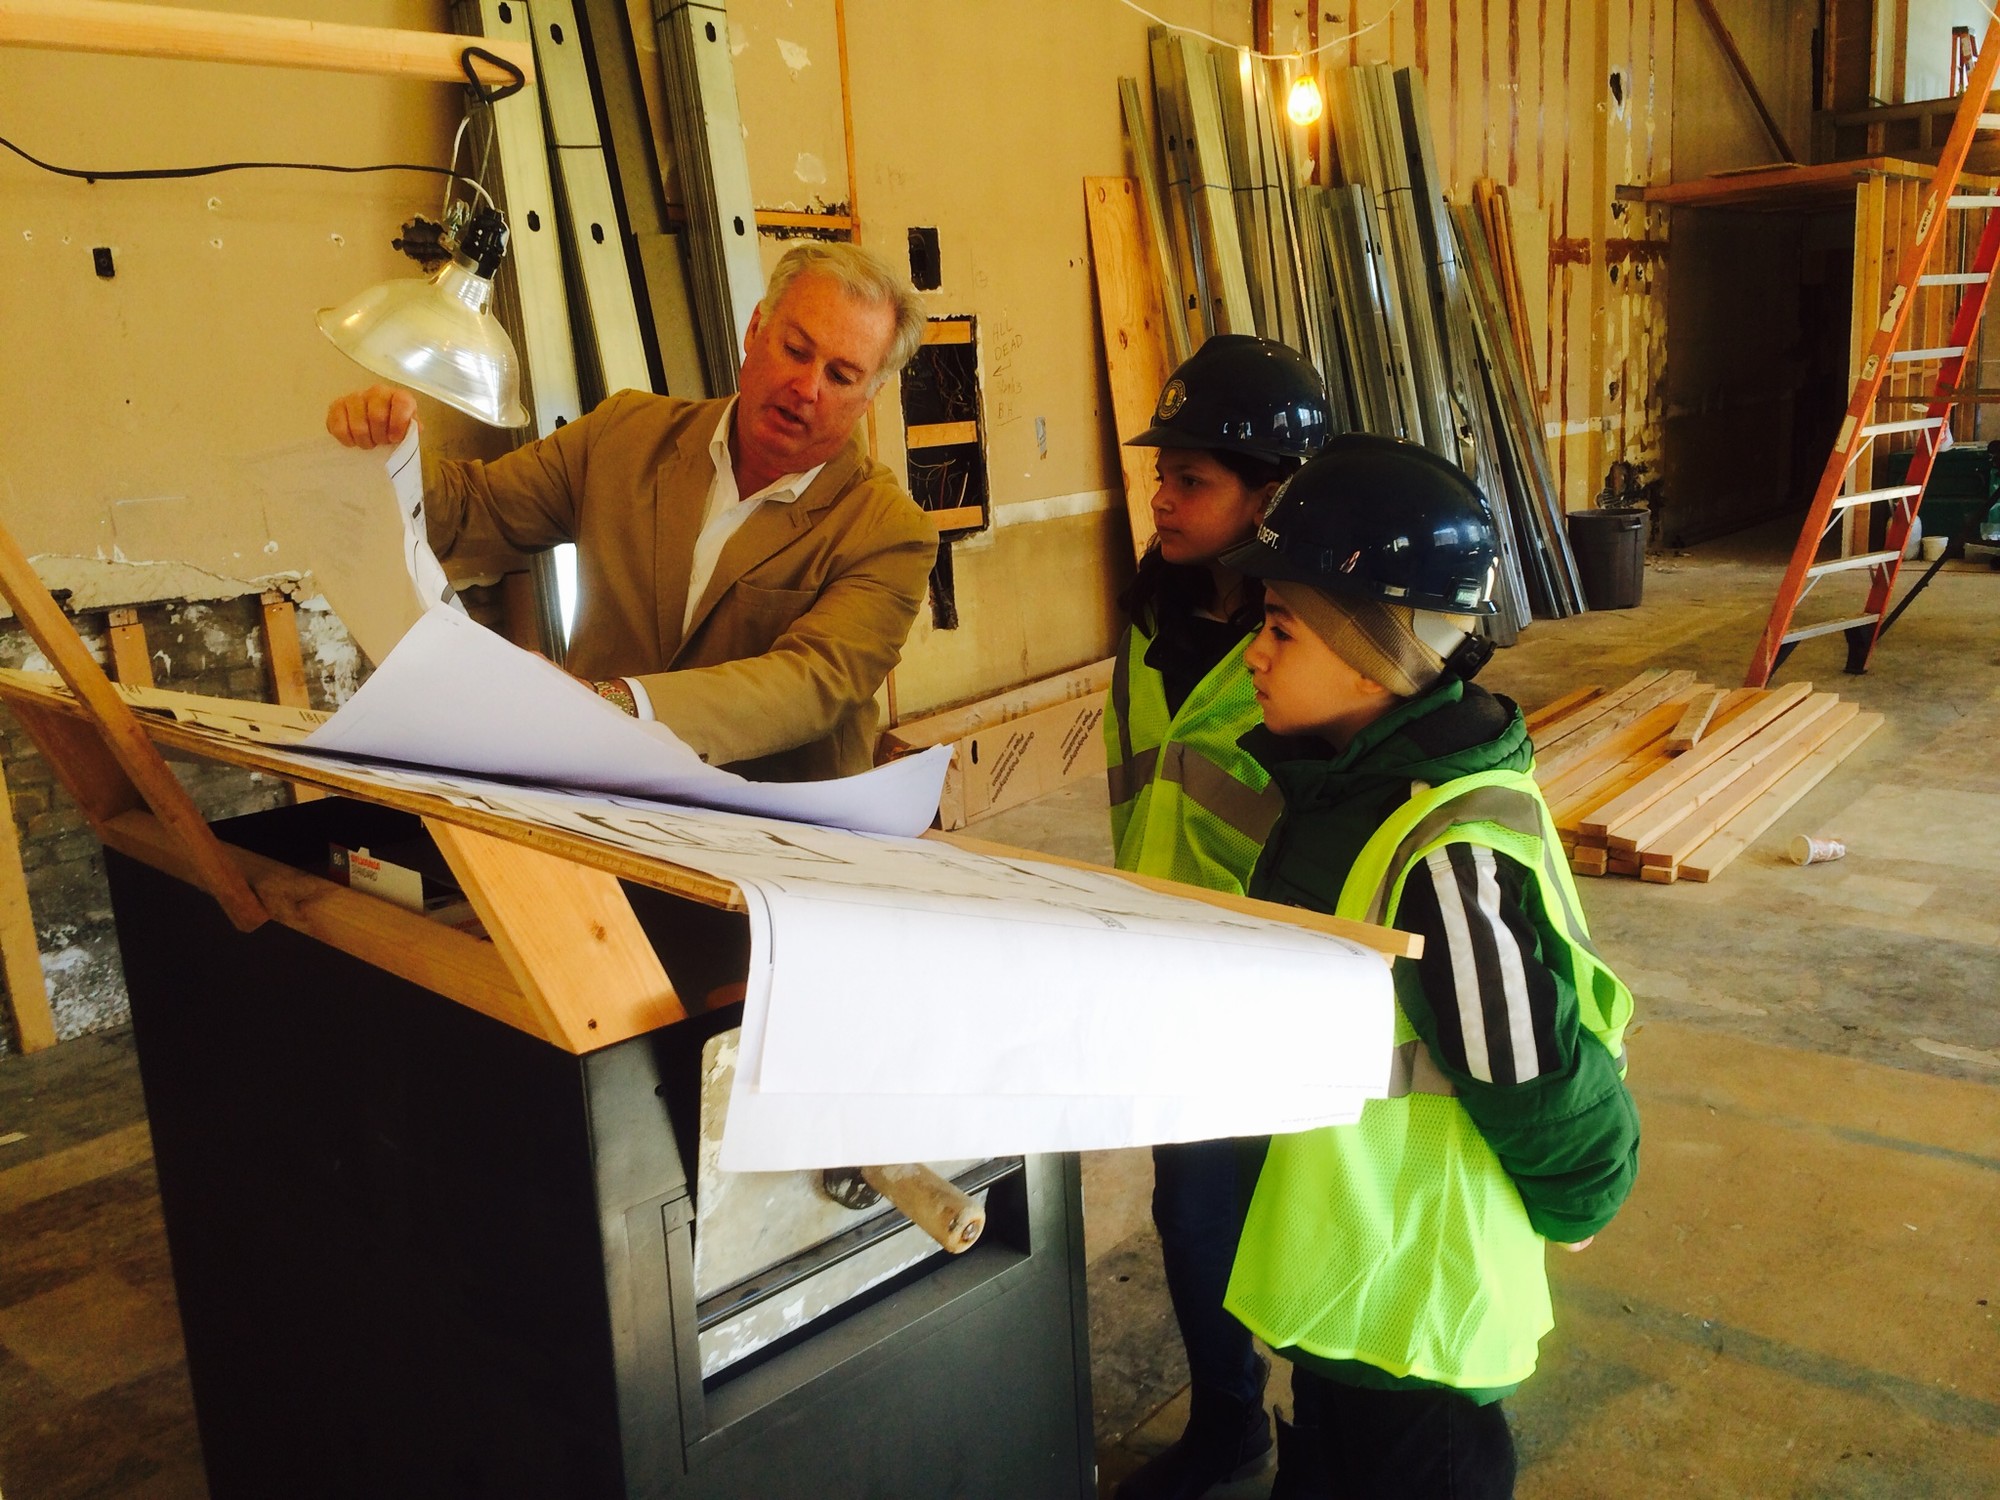 Superintendent of buildings Tom McAleer showed the young mayors the blueprints for the judge’s chambers and conference room on the upper floor of the new village courthouse on Rockaway Avenue.